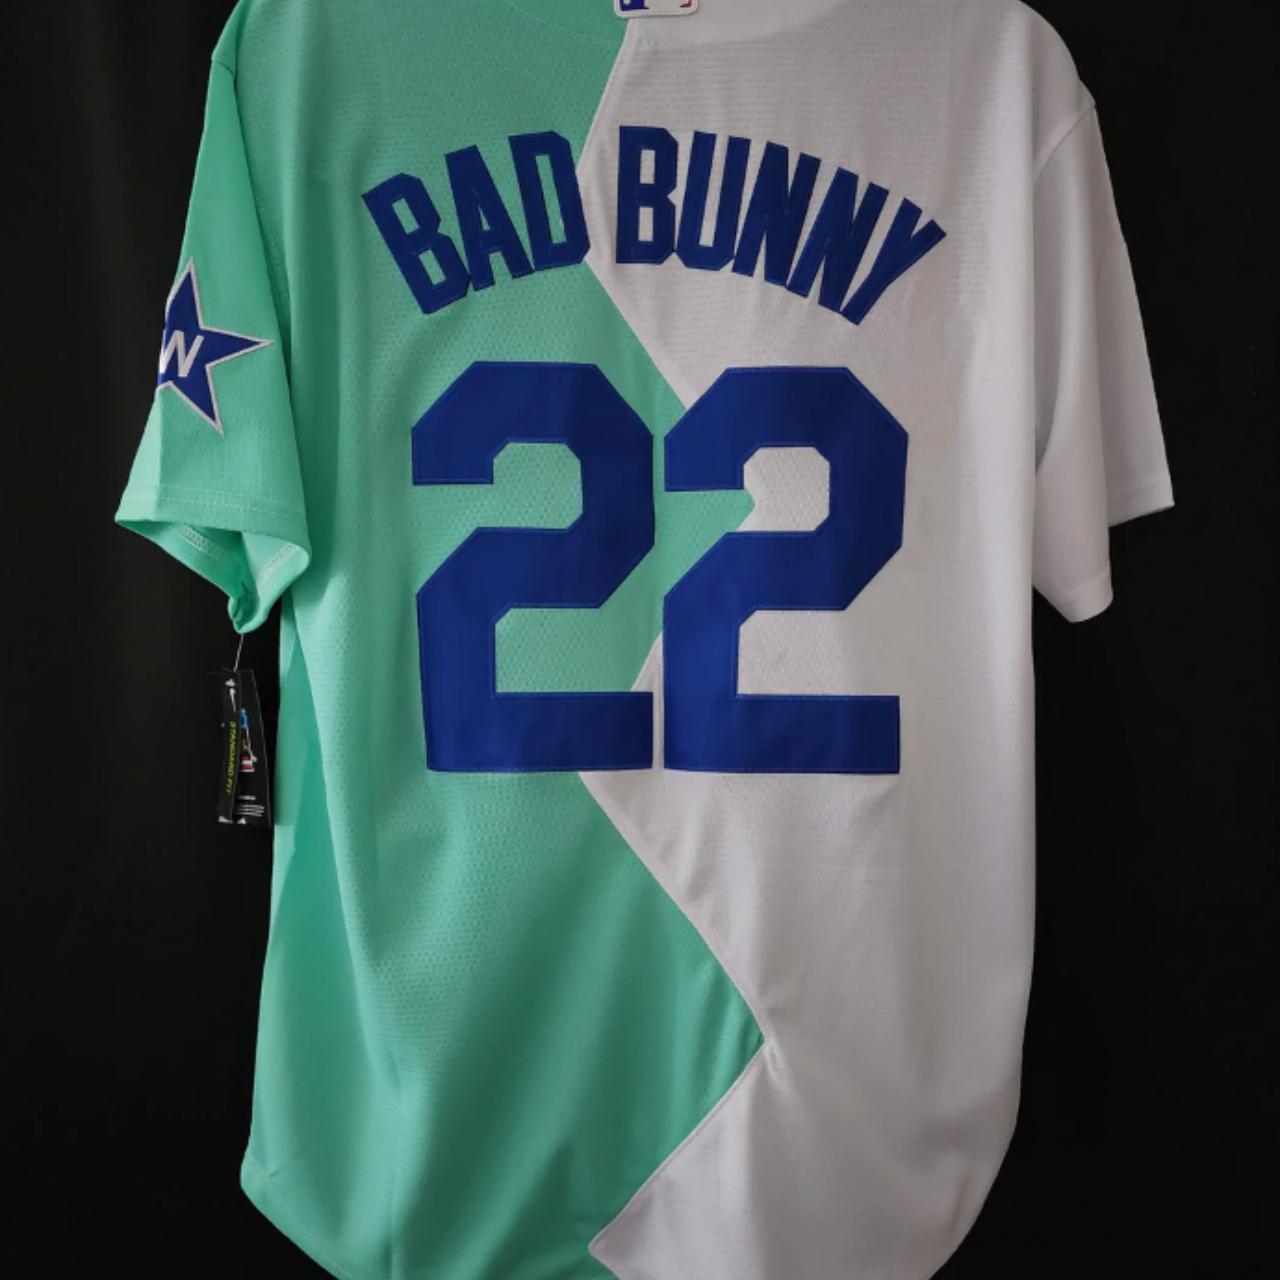 badbunny @Los Angeles Dodgers JERSEY AVAILABLE ON MLBJERSEYPRO.CC